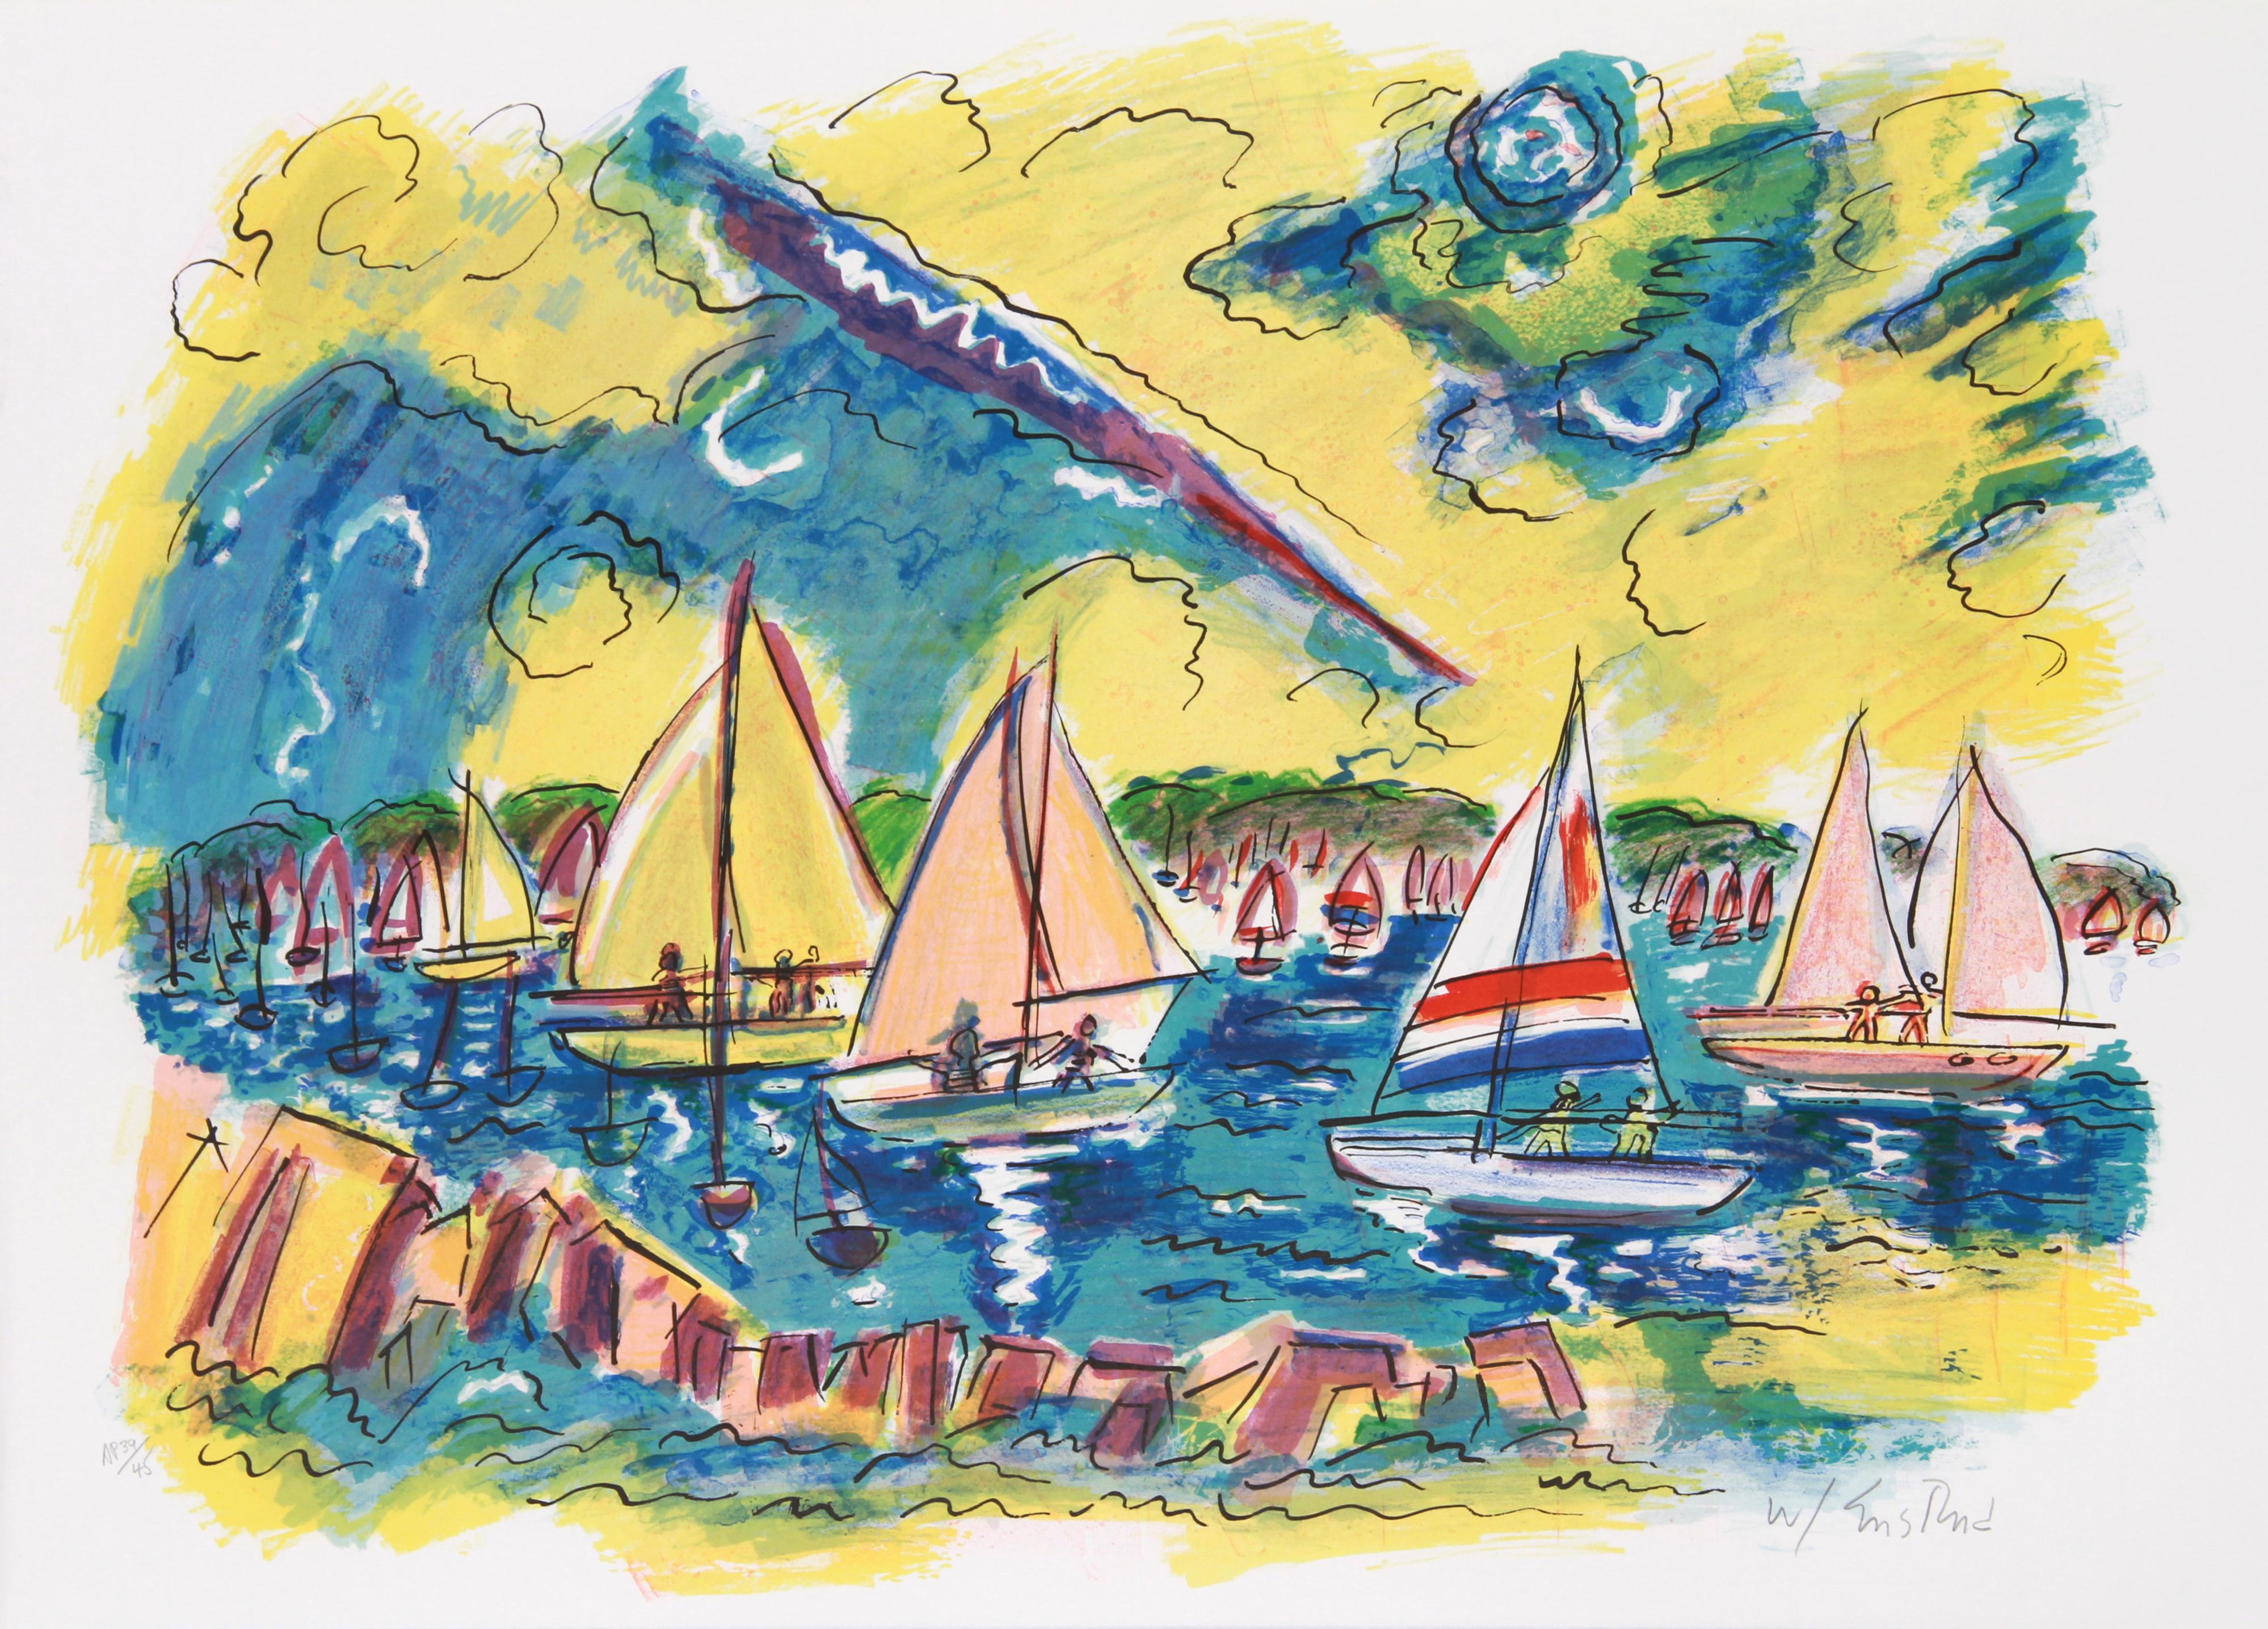 Afternoon Sails
Wayne Ensrud, American (1934)
Date: 1980
Lithograph, signed and numbered in pencil
Edition of 300
Image Size: 20.5 x 28 inches
Size: 21 in. x 30 in. (53.34 cm x 76.2 cm)